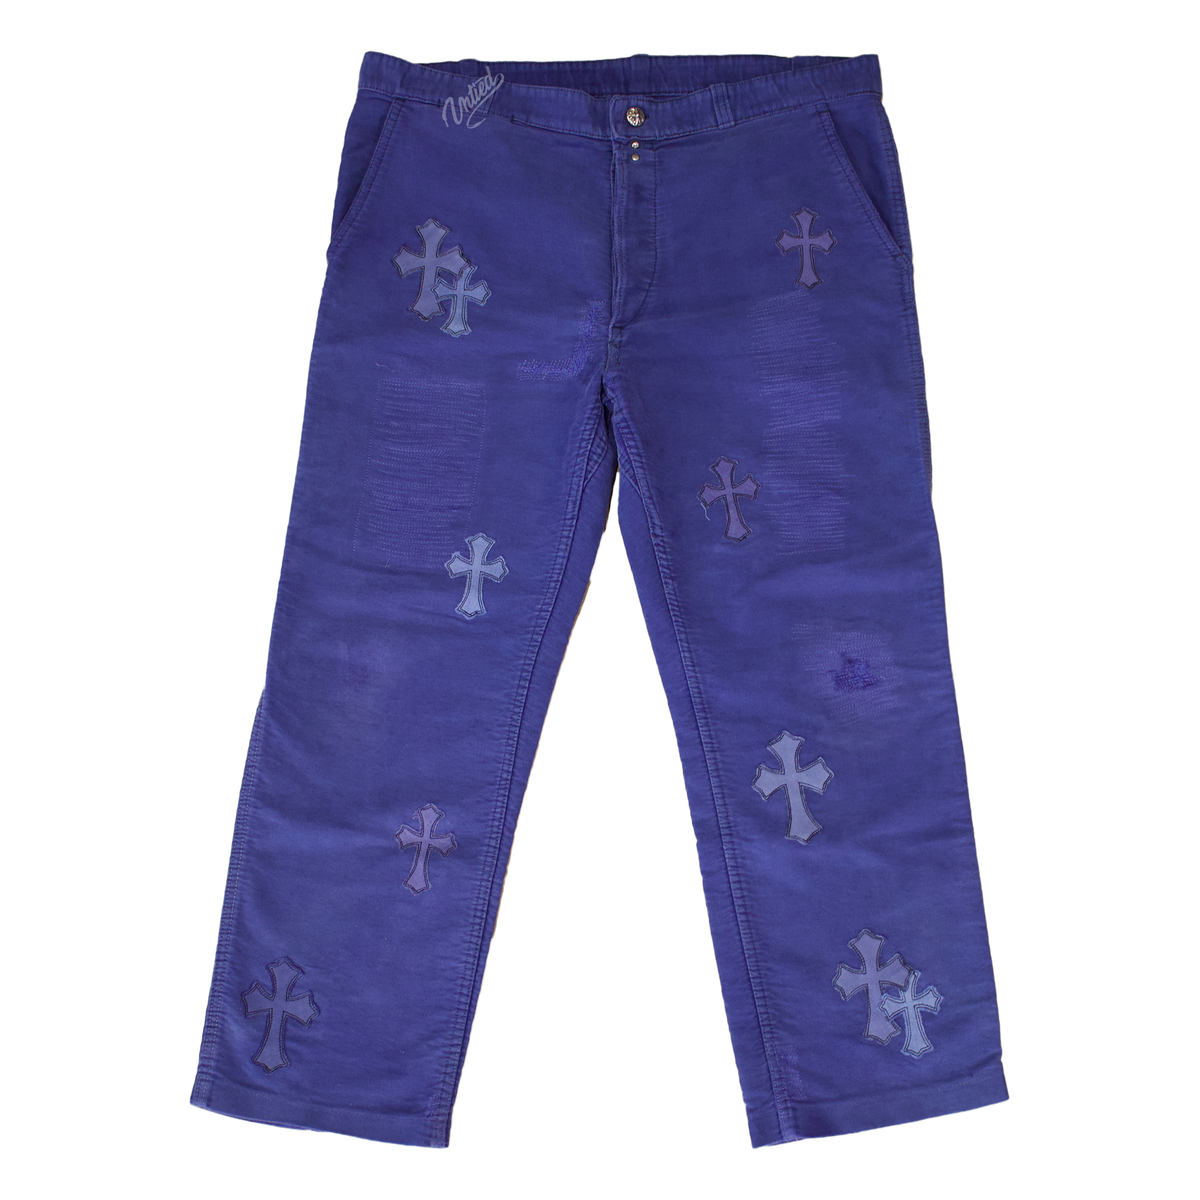 Chrome Hearts French Workwear Pants "Blue"